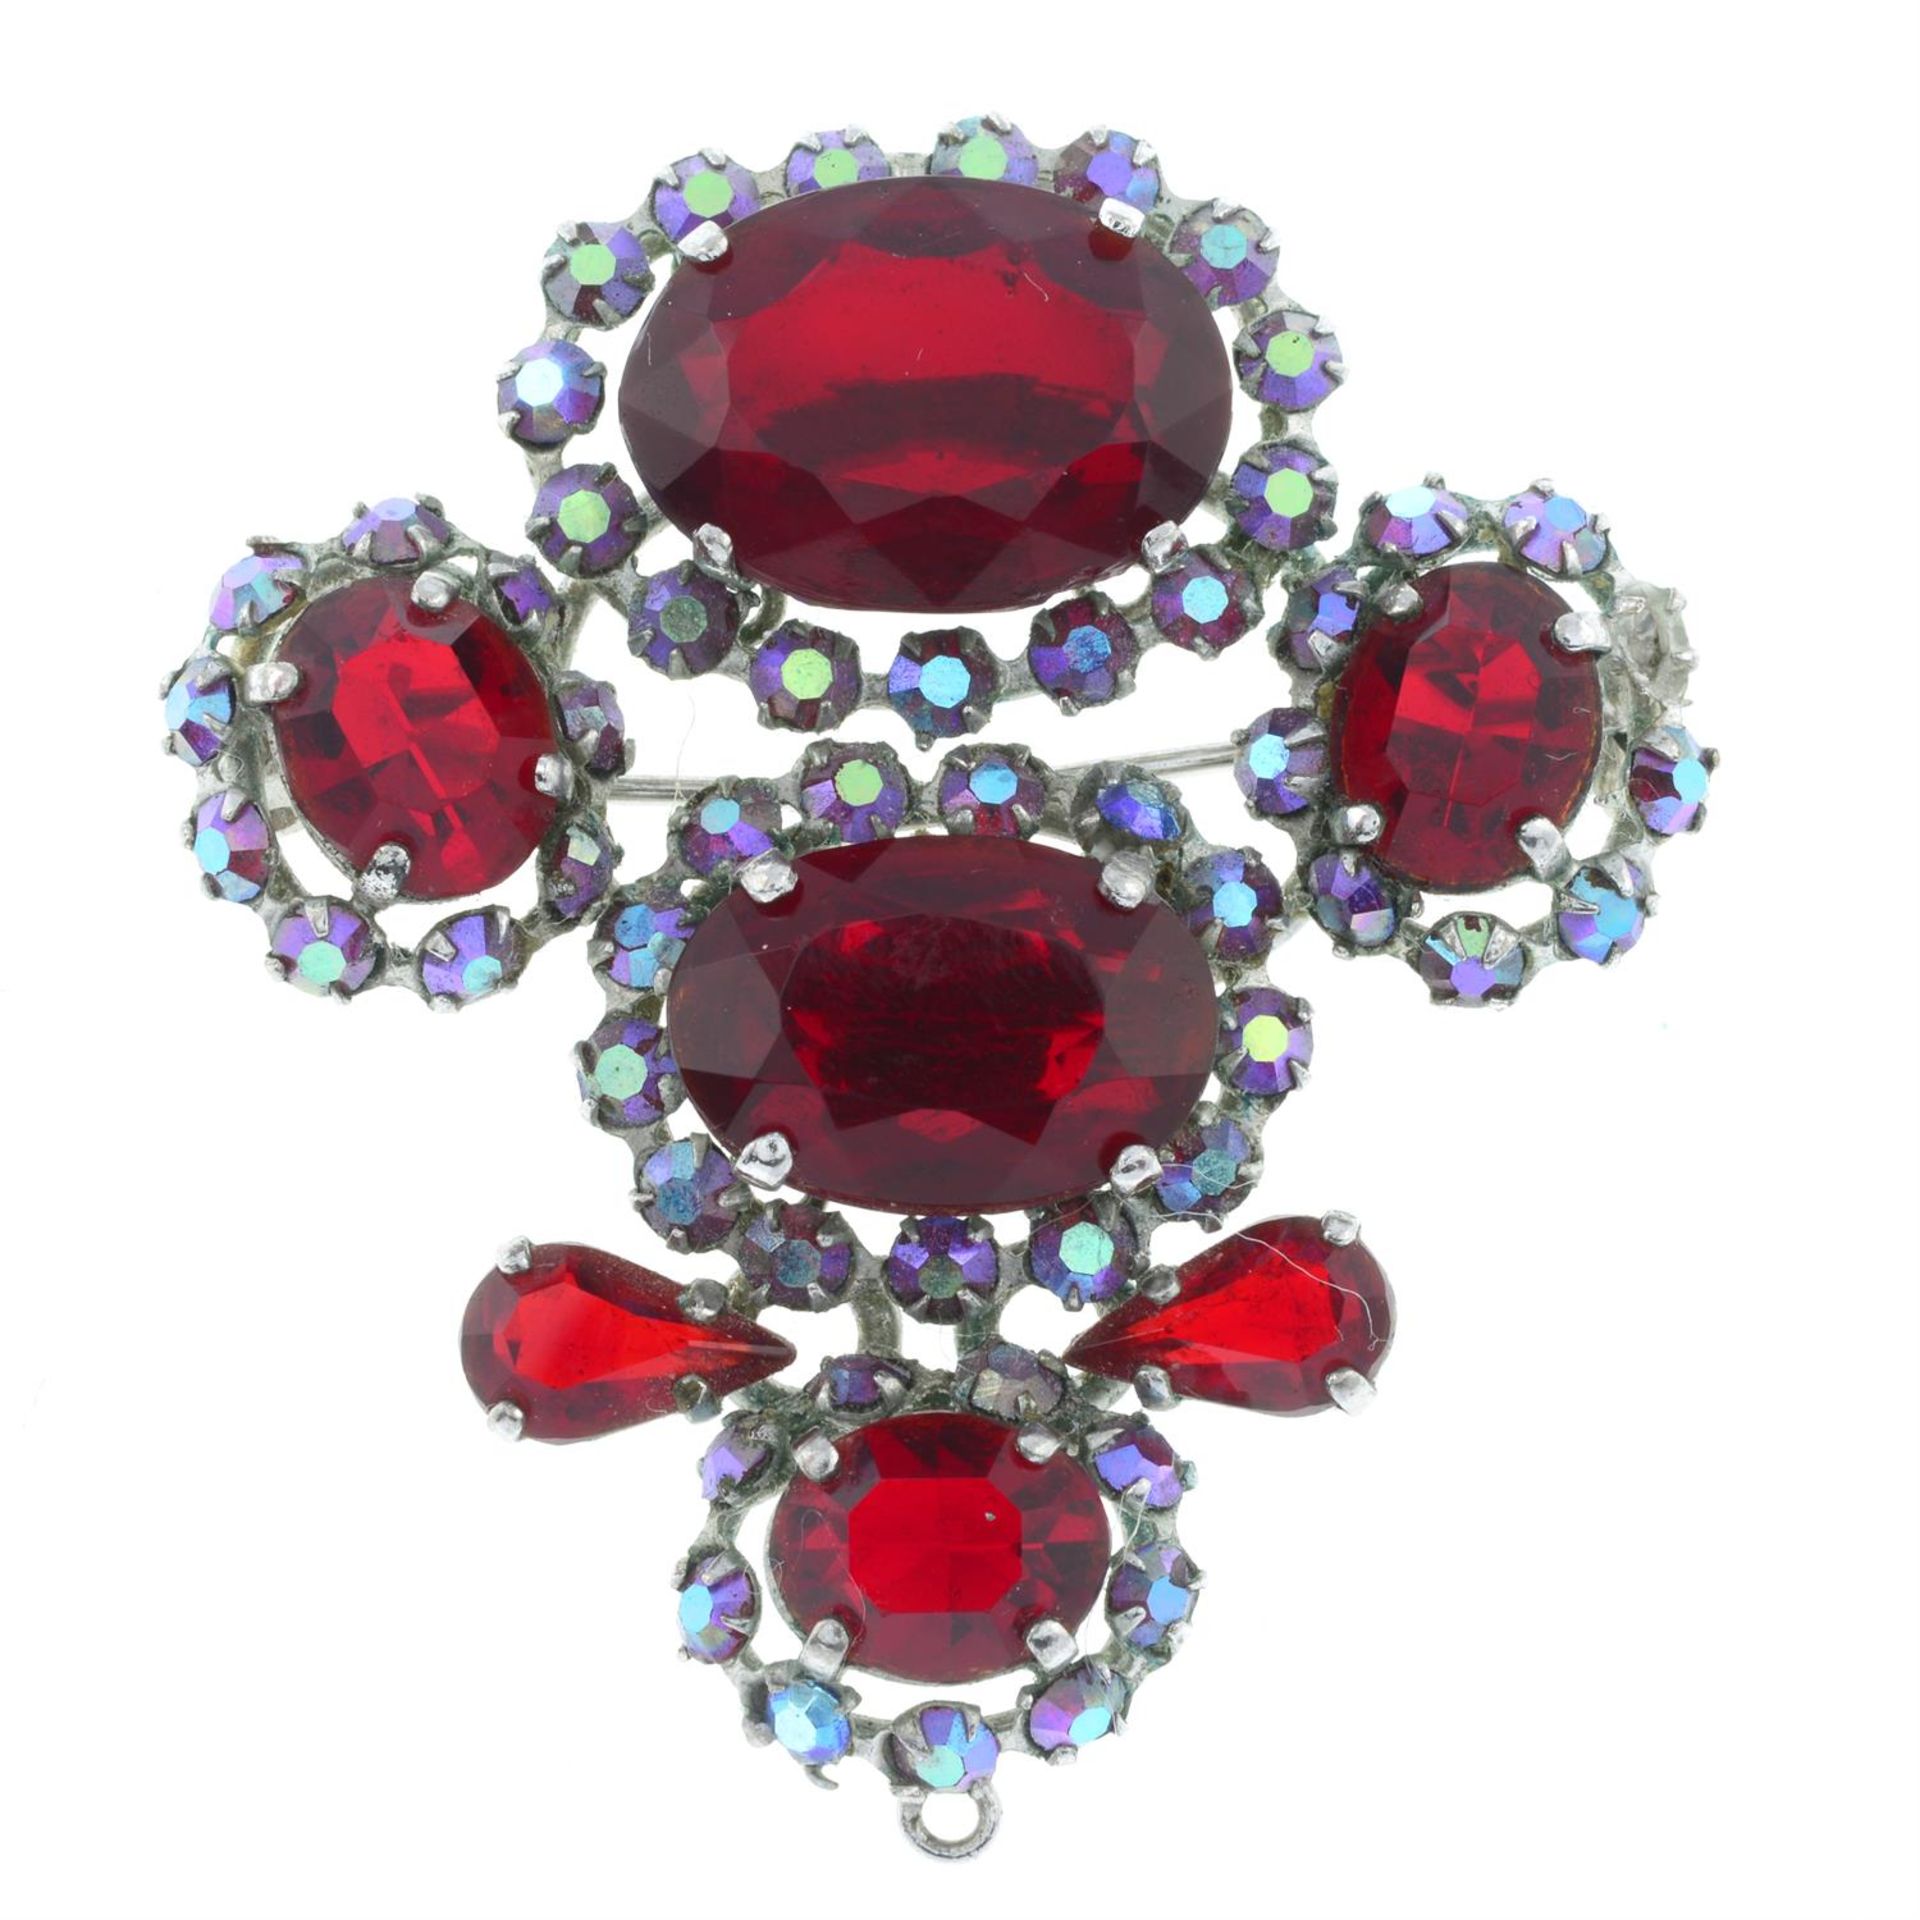 CHRISTIAN DIOR - a red paste brooch.